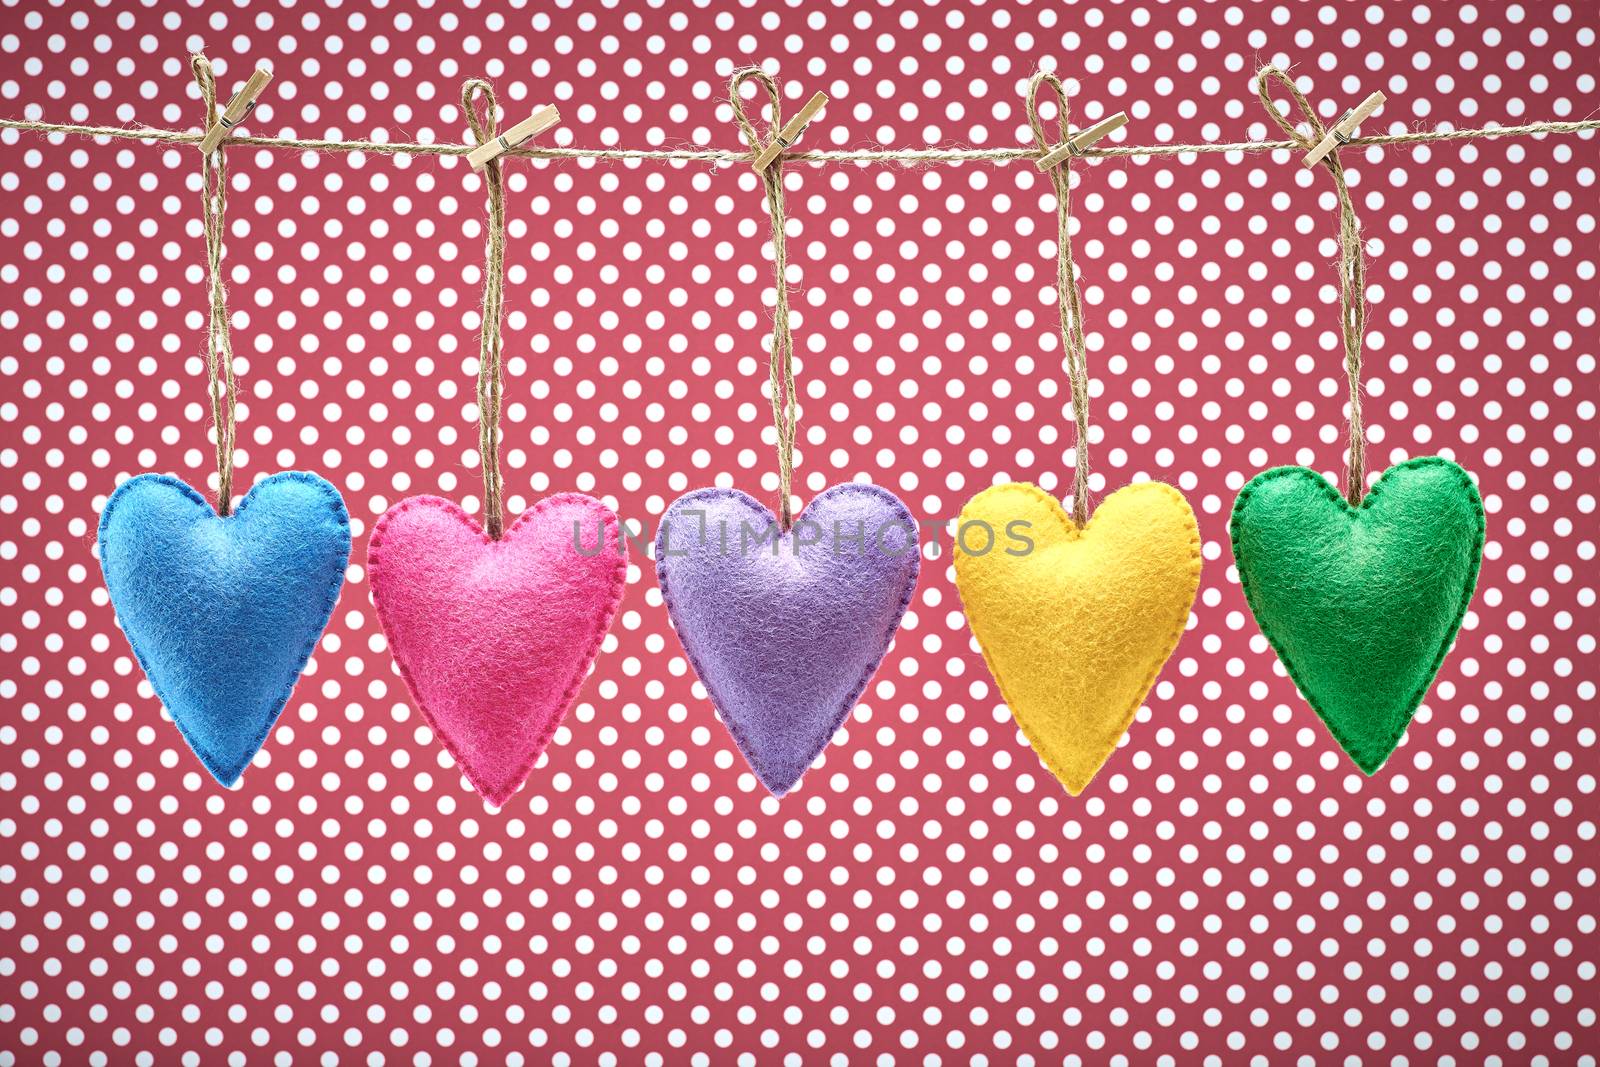 Love hearts, Valentines Day. Hearts set, handmade, hanging on rope. Vintage romantic style on red polka dots. Vivid retro unusual greeting card, multicolored felt, toned, copyspace